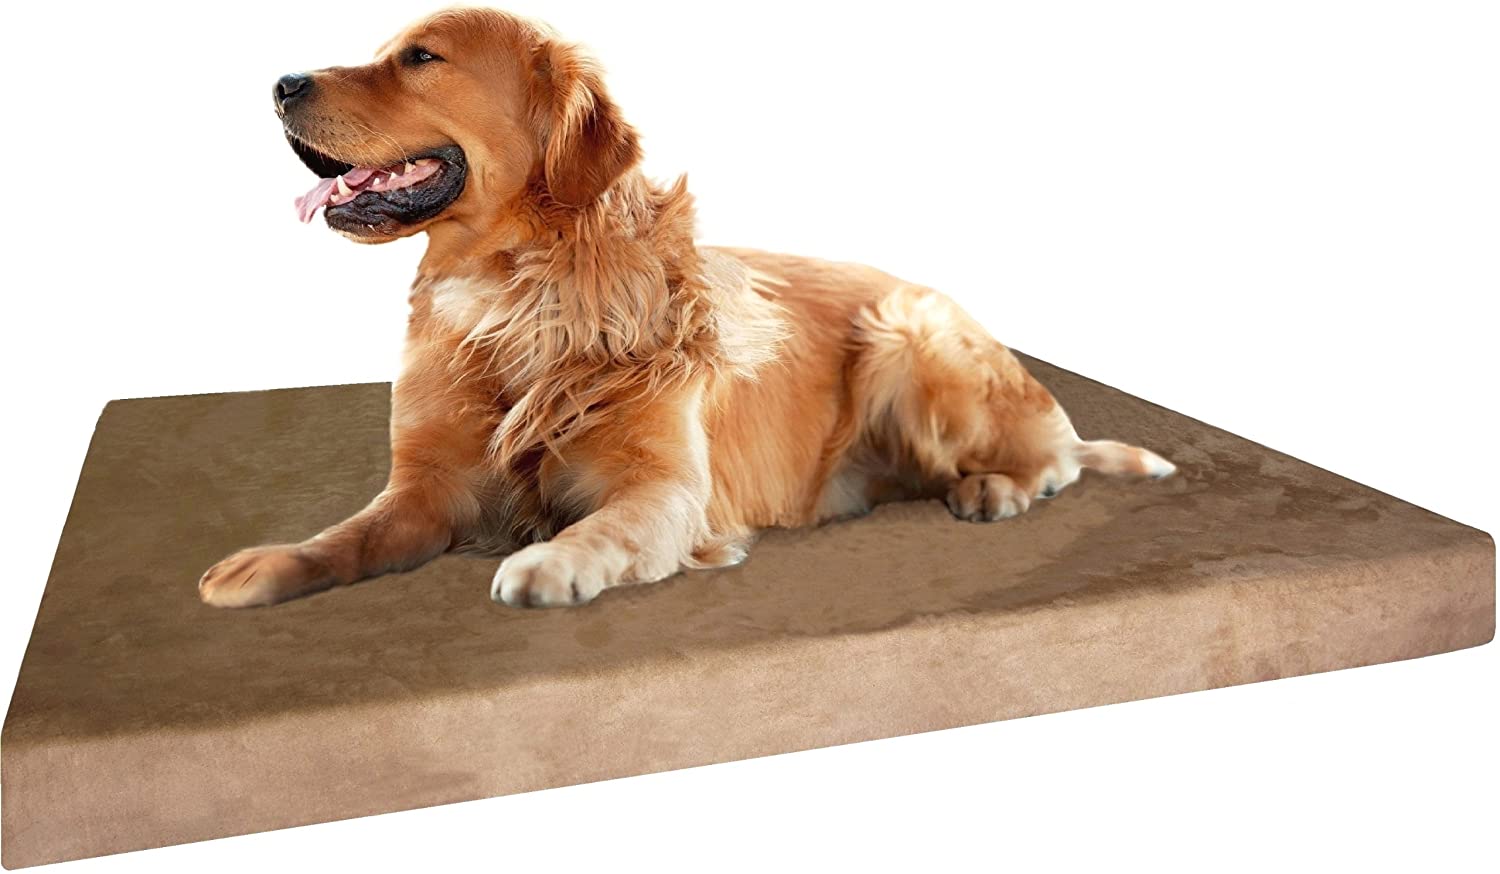 Dogbed4less Memory Foam Dog Bed